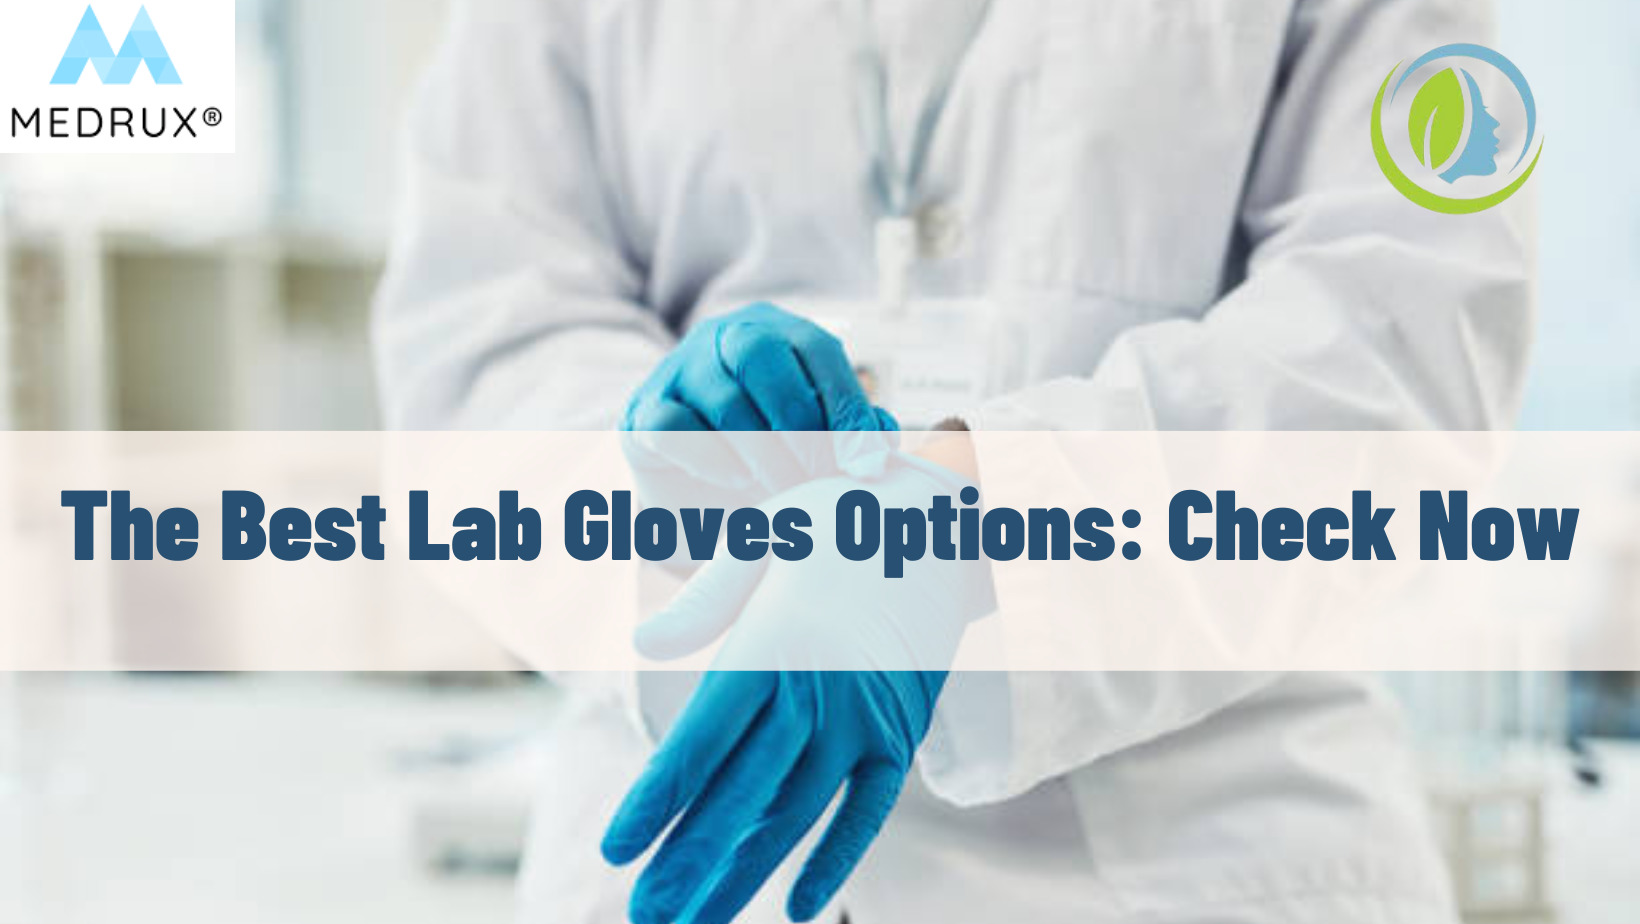 The Best Lab Gloves Options Check Now Medrux